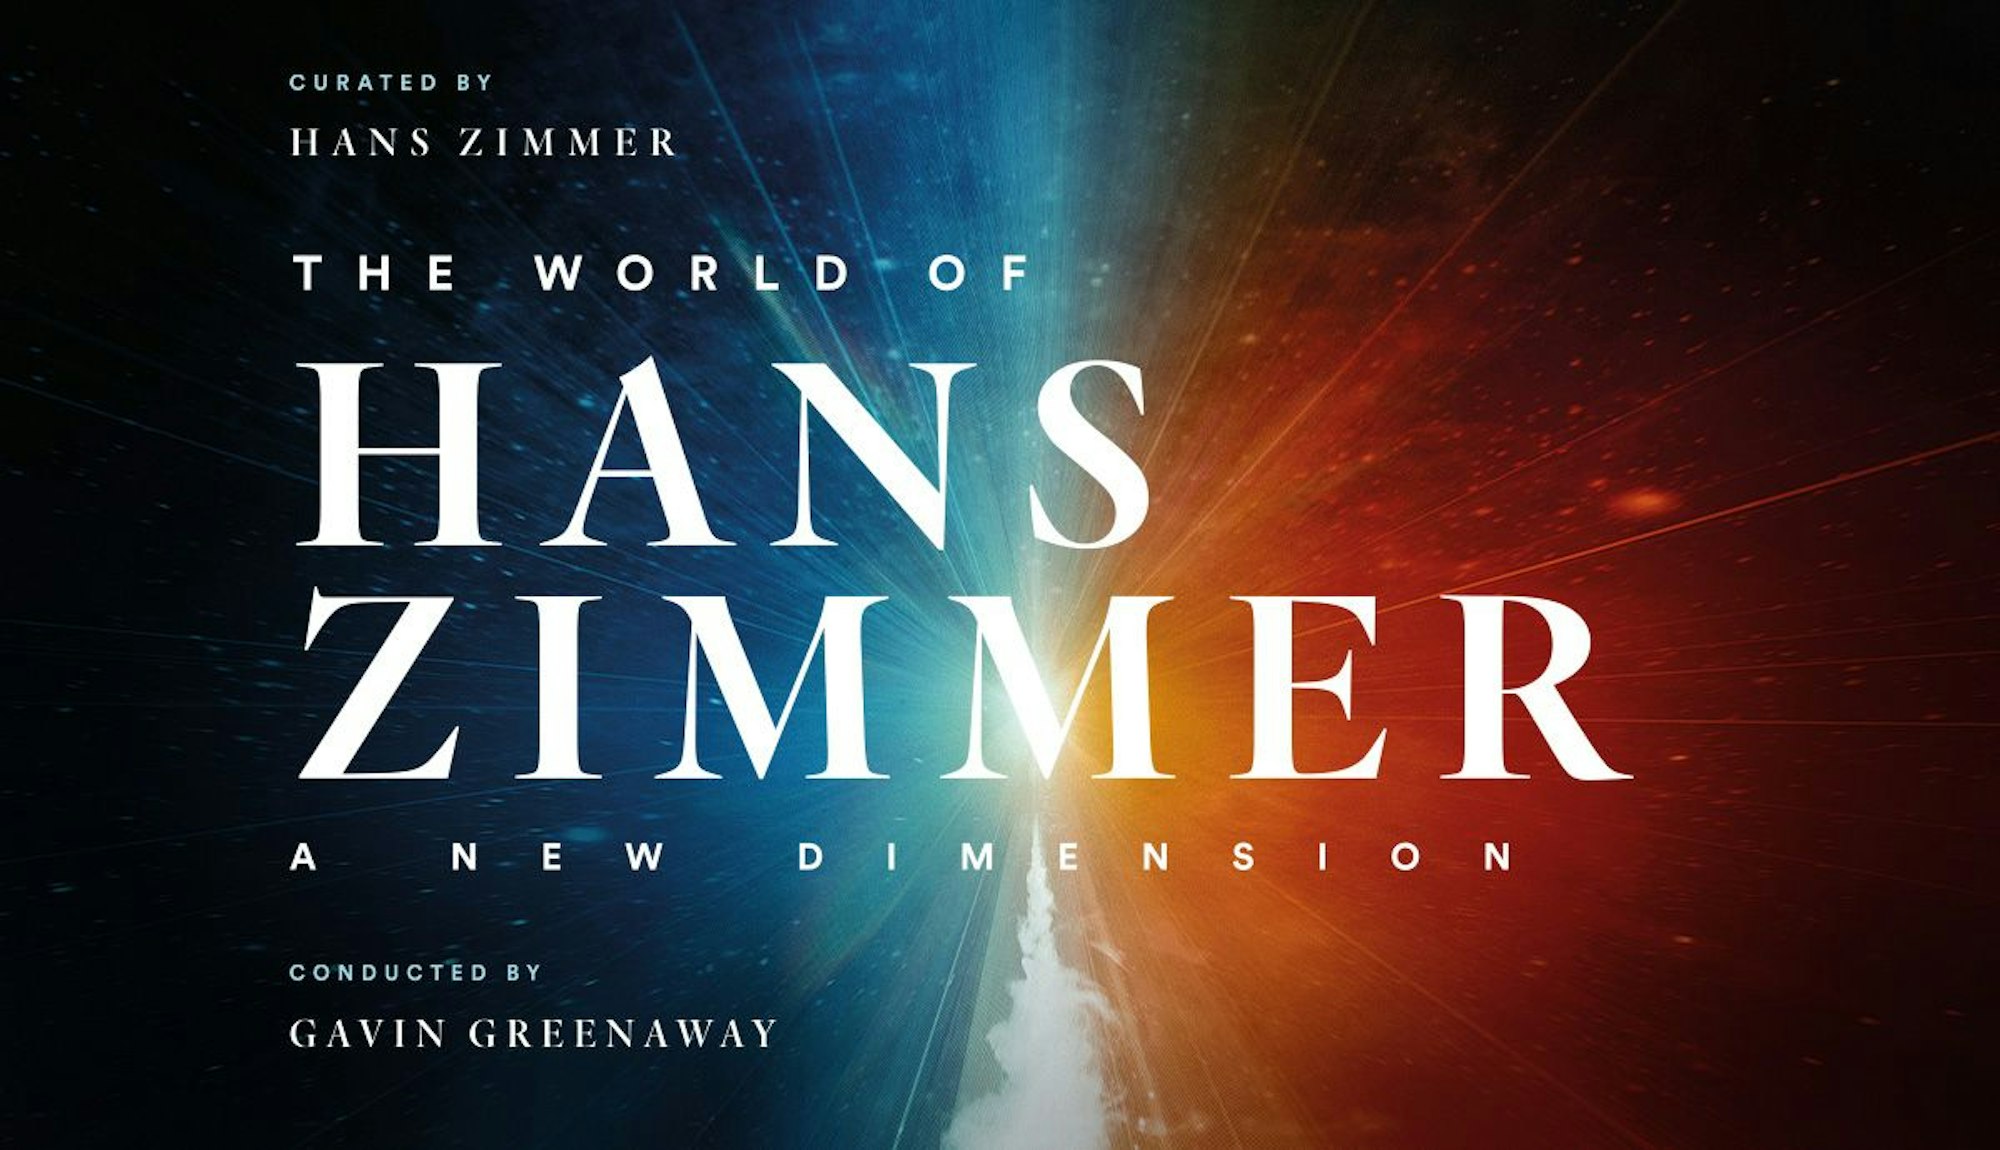 "THE WORLD OF HANS ZIMMER A NEW DIMENSION" am 12.03.2024 in der LANXESS arena